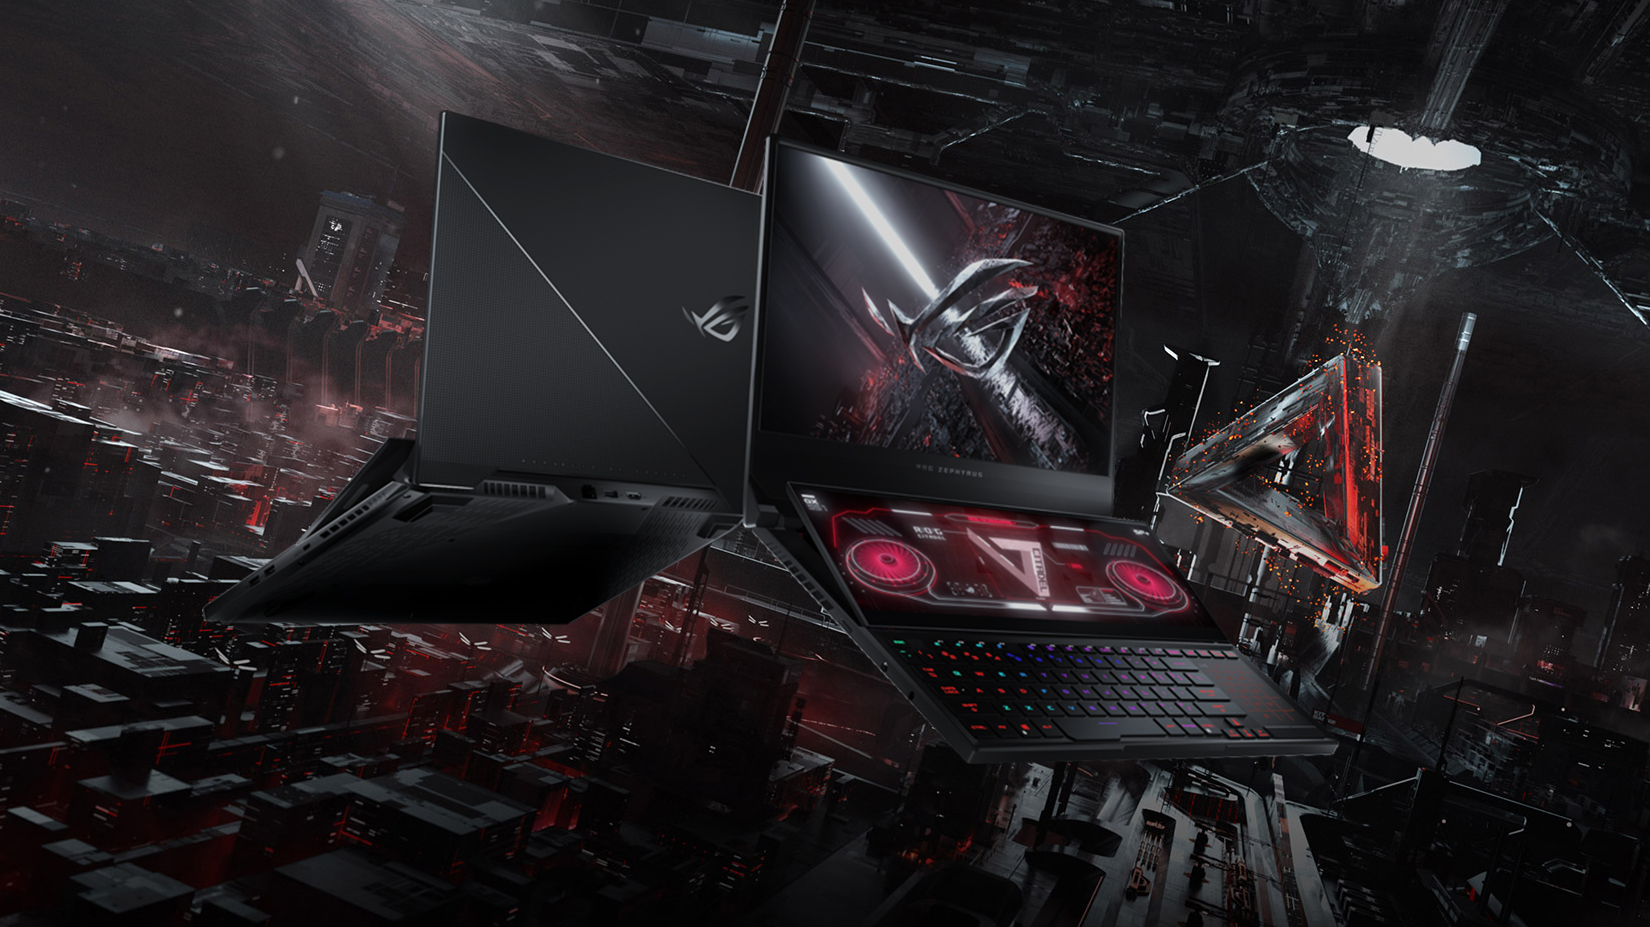 ASUS ROG Strix G15 G513RS-HQ014 Price in Pakistan: Unleash Your Gaming Potential